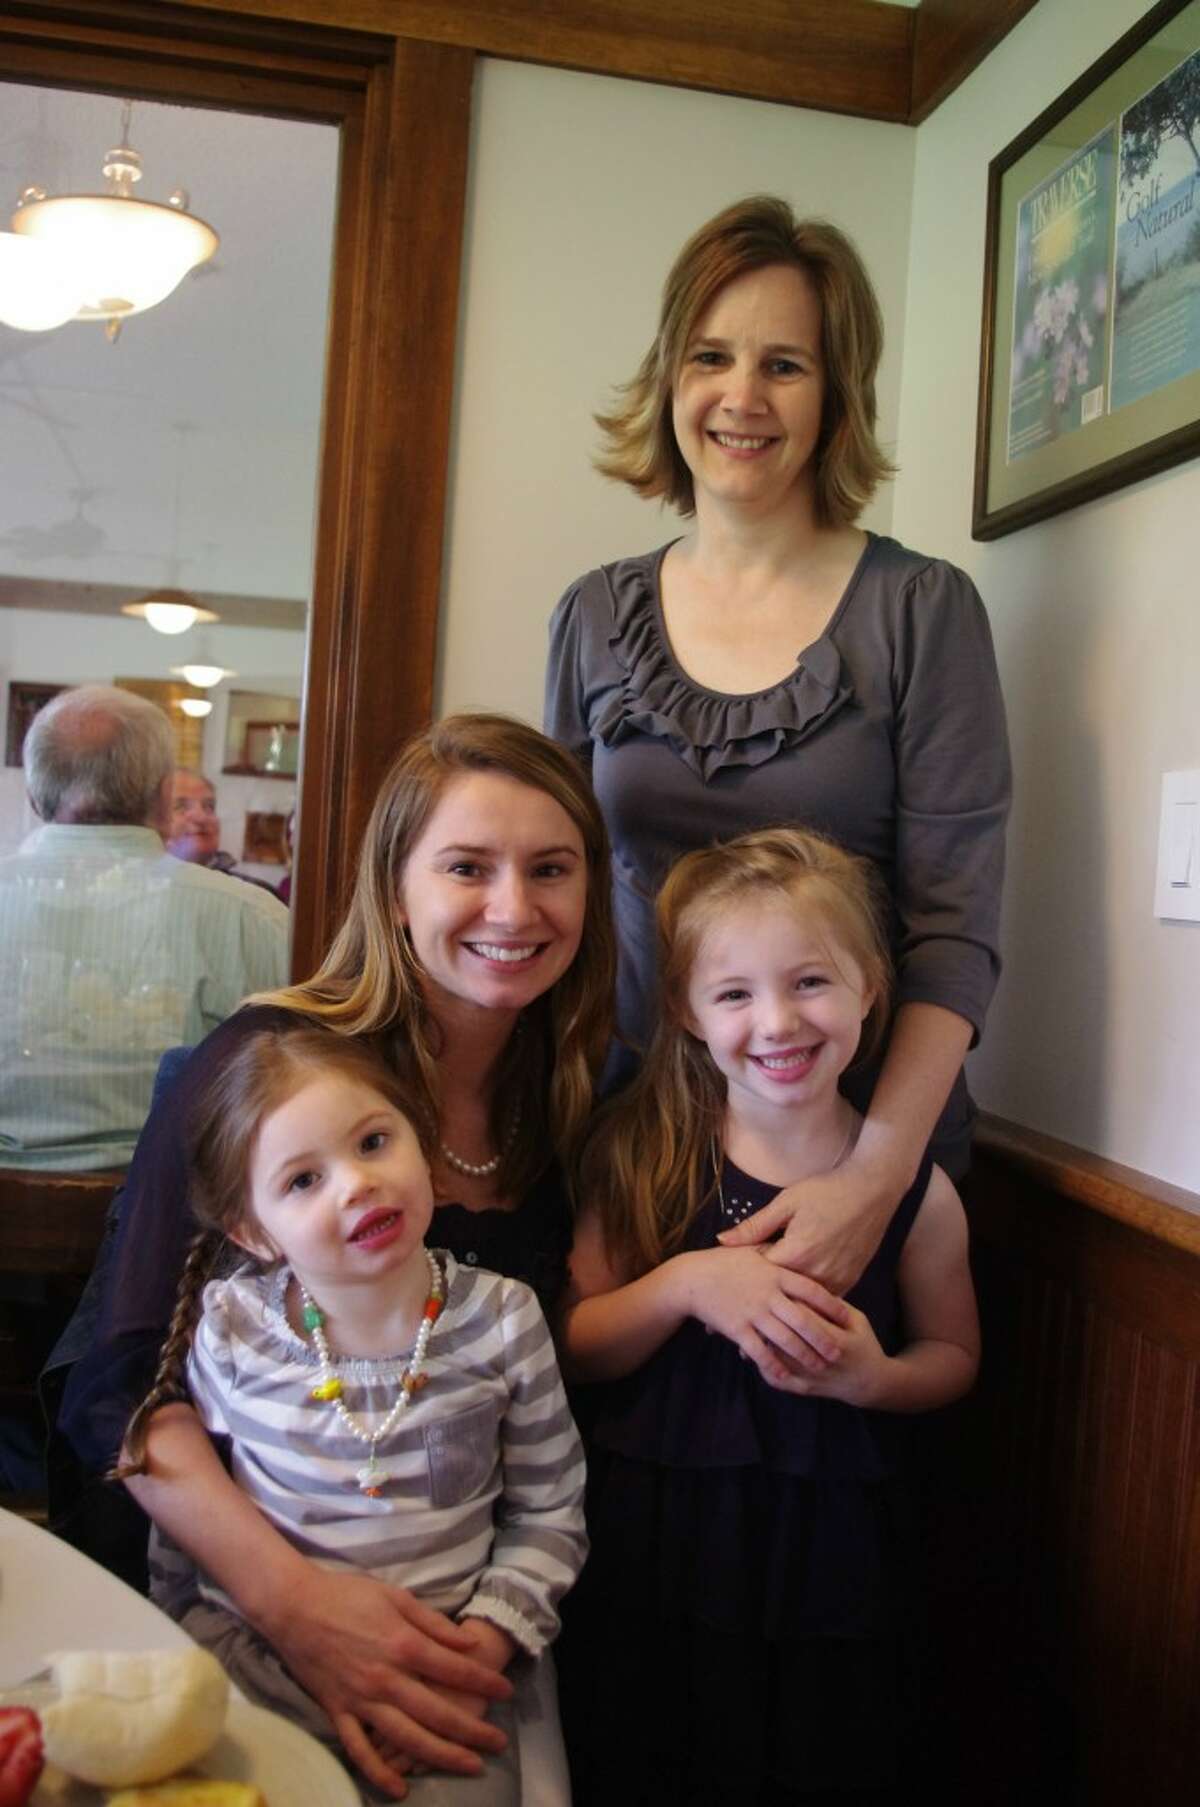 Rachel Maier (seated) of Manistee celebrated Mother’s Day with her children Zoe and Ellie (seated) and also her mother, Wendy Maier (standing) of Brethren. (Dave Yarnell/News Advocate)